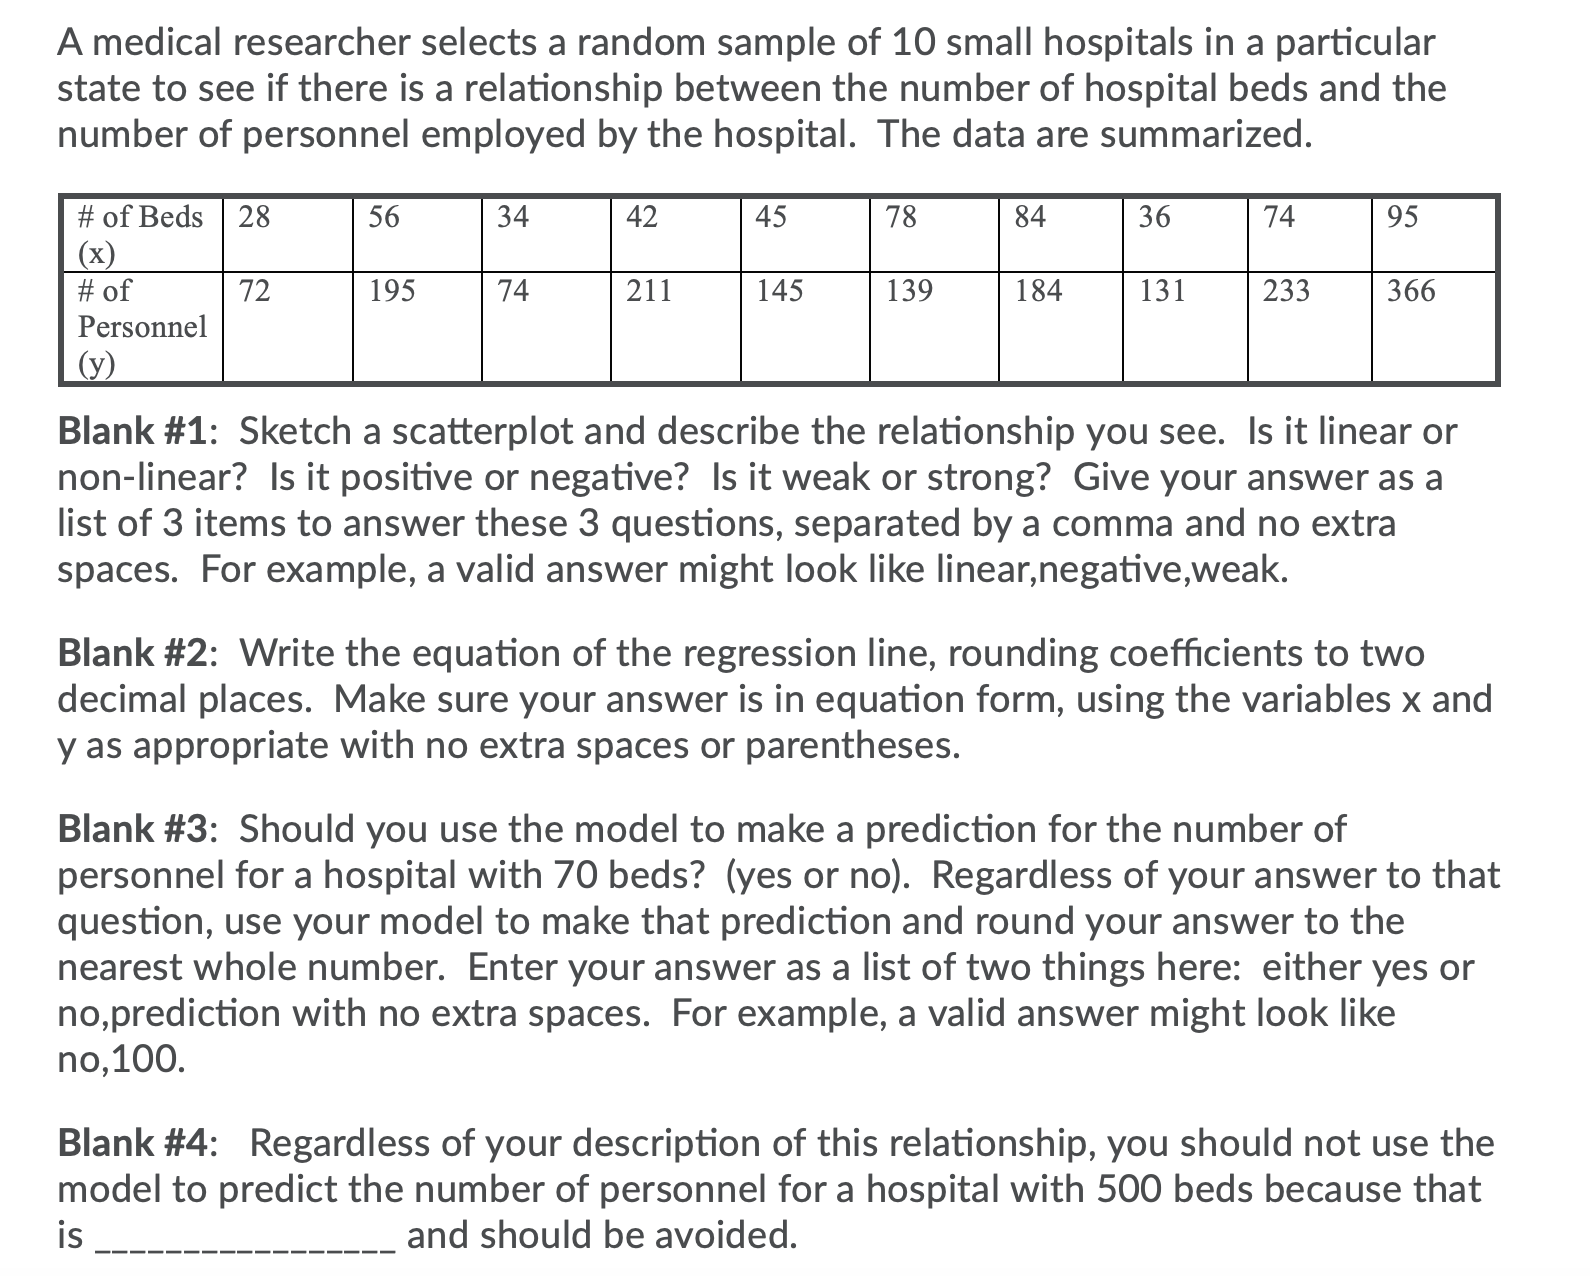 A medical researcher selects a random sample of 10 small hospitals in a particular
state to see if there is a relationship between the number of hospital beds and the
number of personnel employed by the hospital. The data are summarized.
# of Beds 28
(x)
# of
Personnel
56
34
42
45
78
84
36
74
95
72
195
74
211
145
139
184
131
233
366
(у)
Blank #1: Sketch a scatterplot and describe the relationship you see. Is it linear or
non-linear? Is it positive or negative? Is it weak or strong? Give your answer as a
list of 3 items to answer these 3 questions, separated by a comma and no extra
spaces. For example, a valid answer might look like linear,negative,weak.
Blank #2: Write the equation of the regression line, rounding coefficients to two
decimal places. Make sure your answer is in equation form, using the variables x and
y as appropriate with no extra spaces or parentheses.
Blank #3: Should you use the model to make a prediction for the number of
personnel for a hospital with 70 beds? (yes or no). Regardless of your answer to that
question, use your model to make that prediction and round your answer to the
nearest whole number. Enter your answer as a list of two things here: either yes or
no,prediction with no extra spaces. For example, a valid answer might look like
no,100.
Blank #4: Regardless of your description of this relationship, you should not use the
model to predict the number of personnel for a hospital with 500 beds because that
is
and should be avoided.
